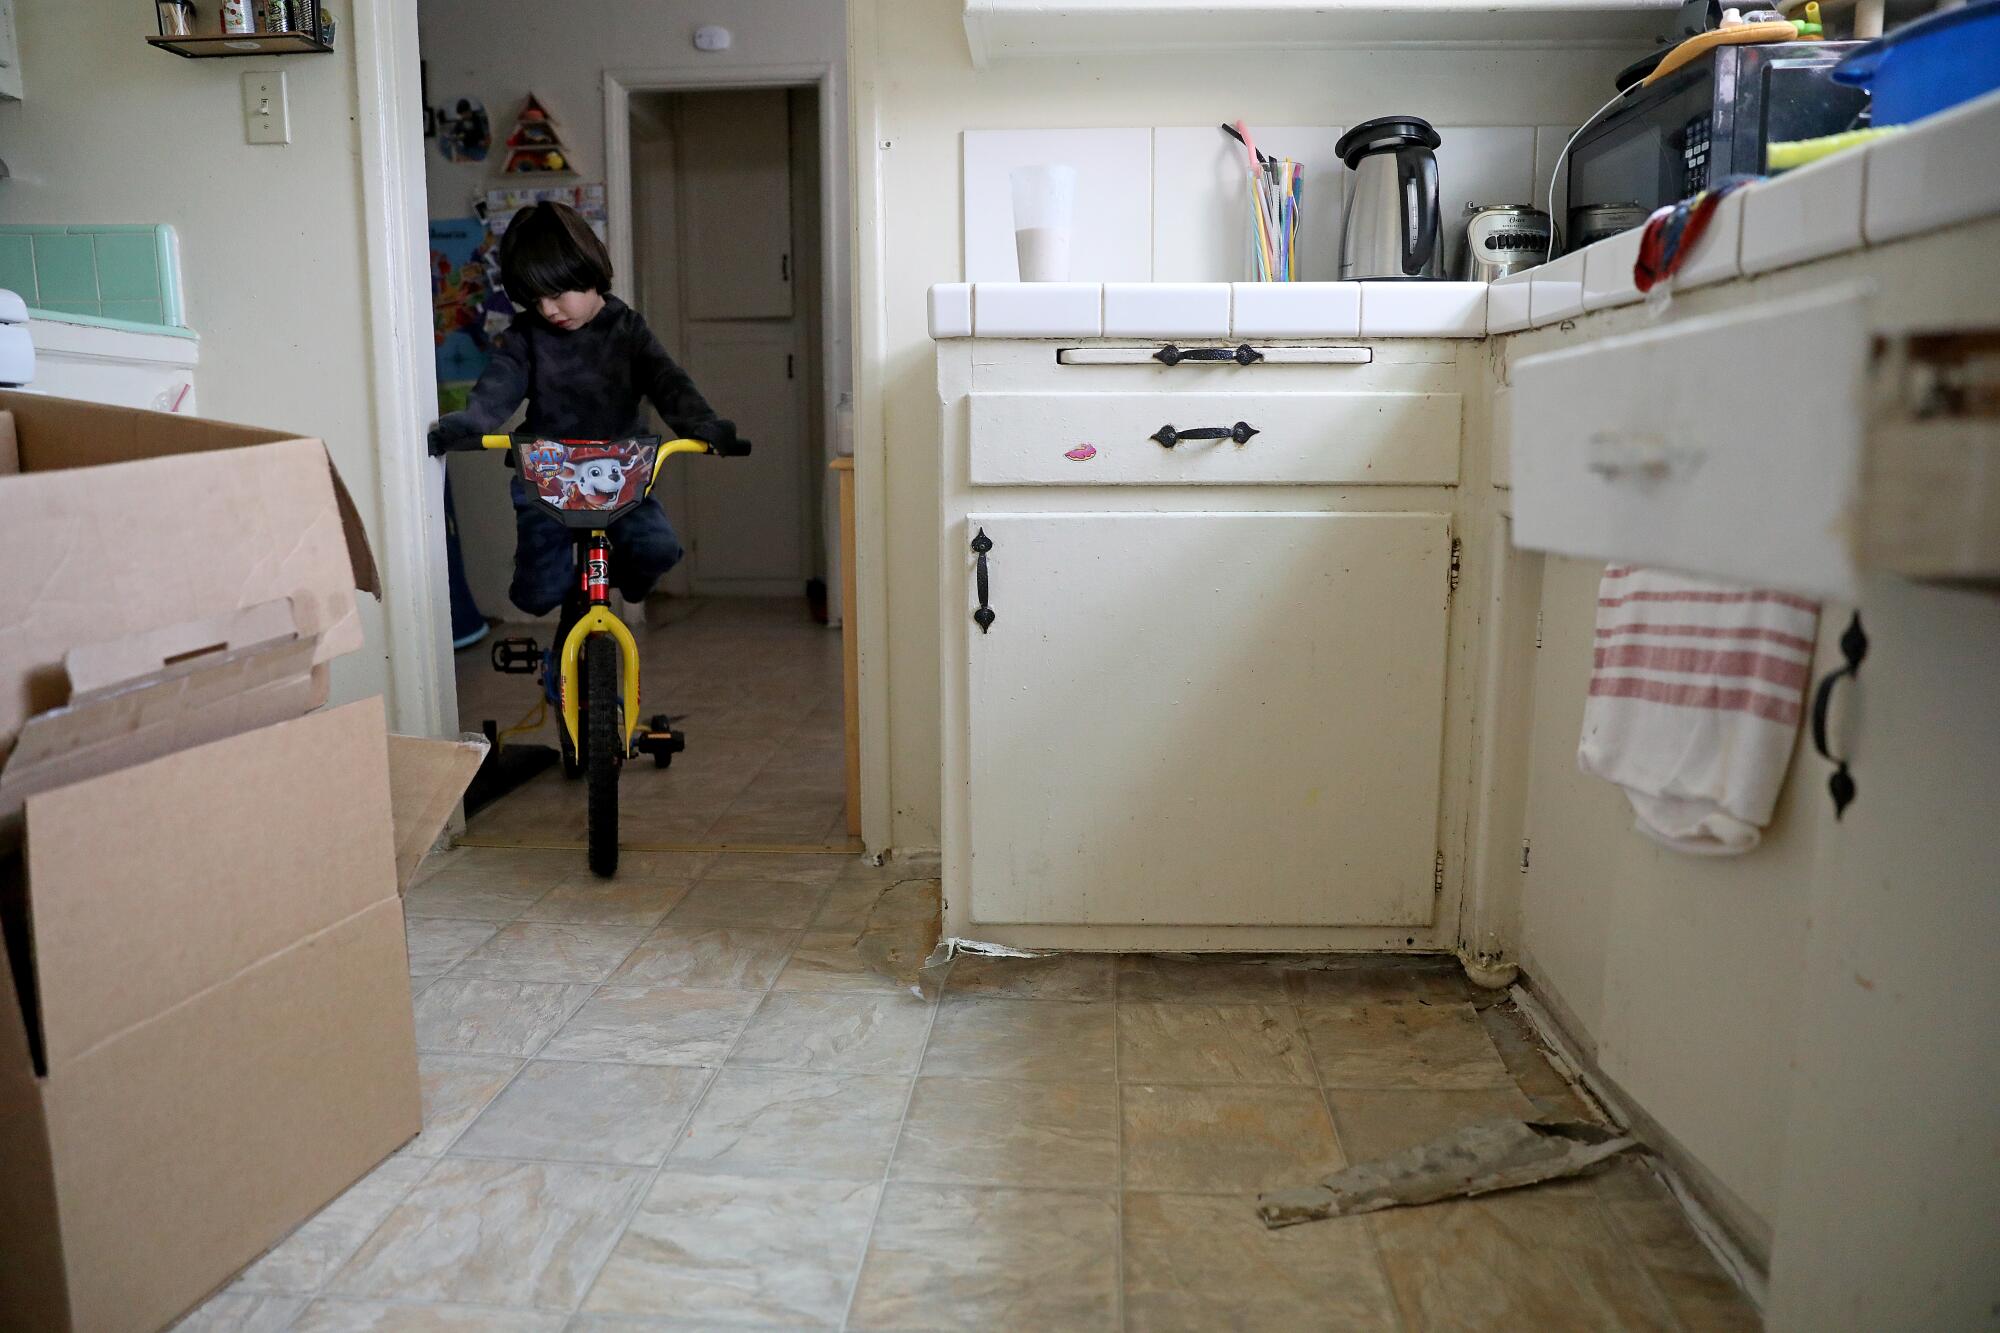 Liam Ponce plays on a cracked kitchen floor   at the Chesapeake Apartments.